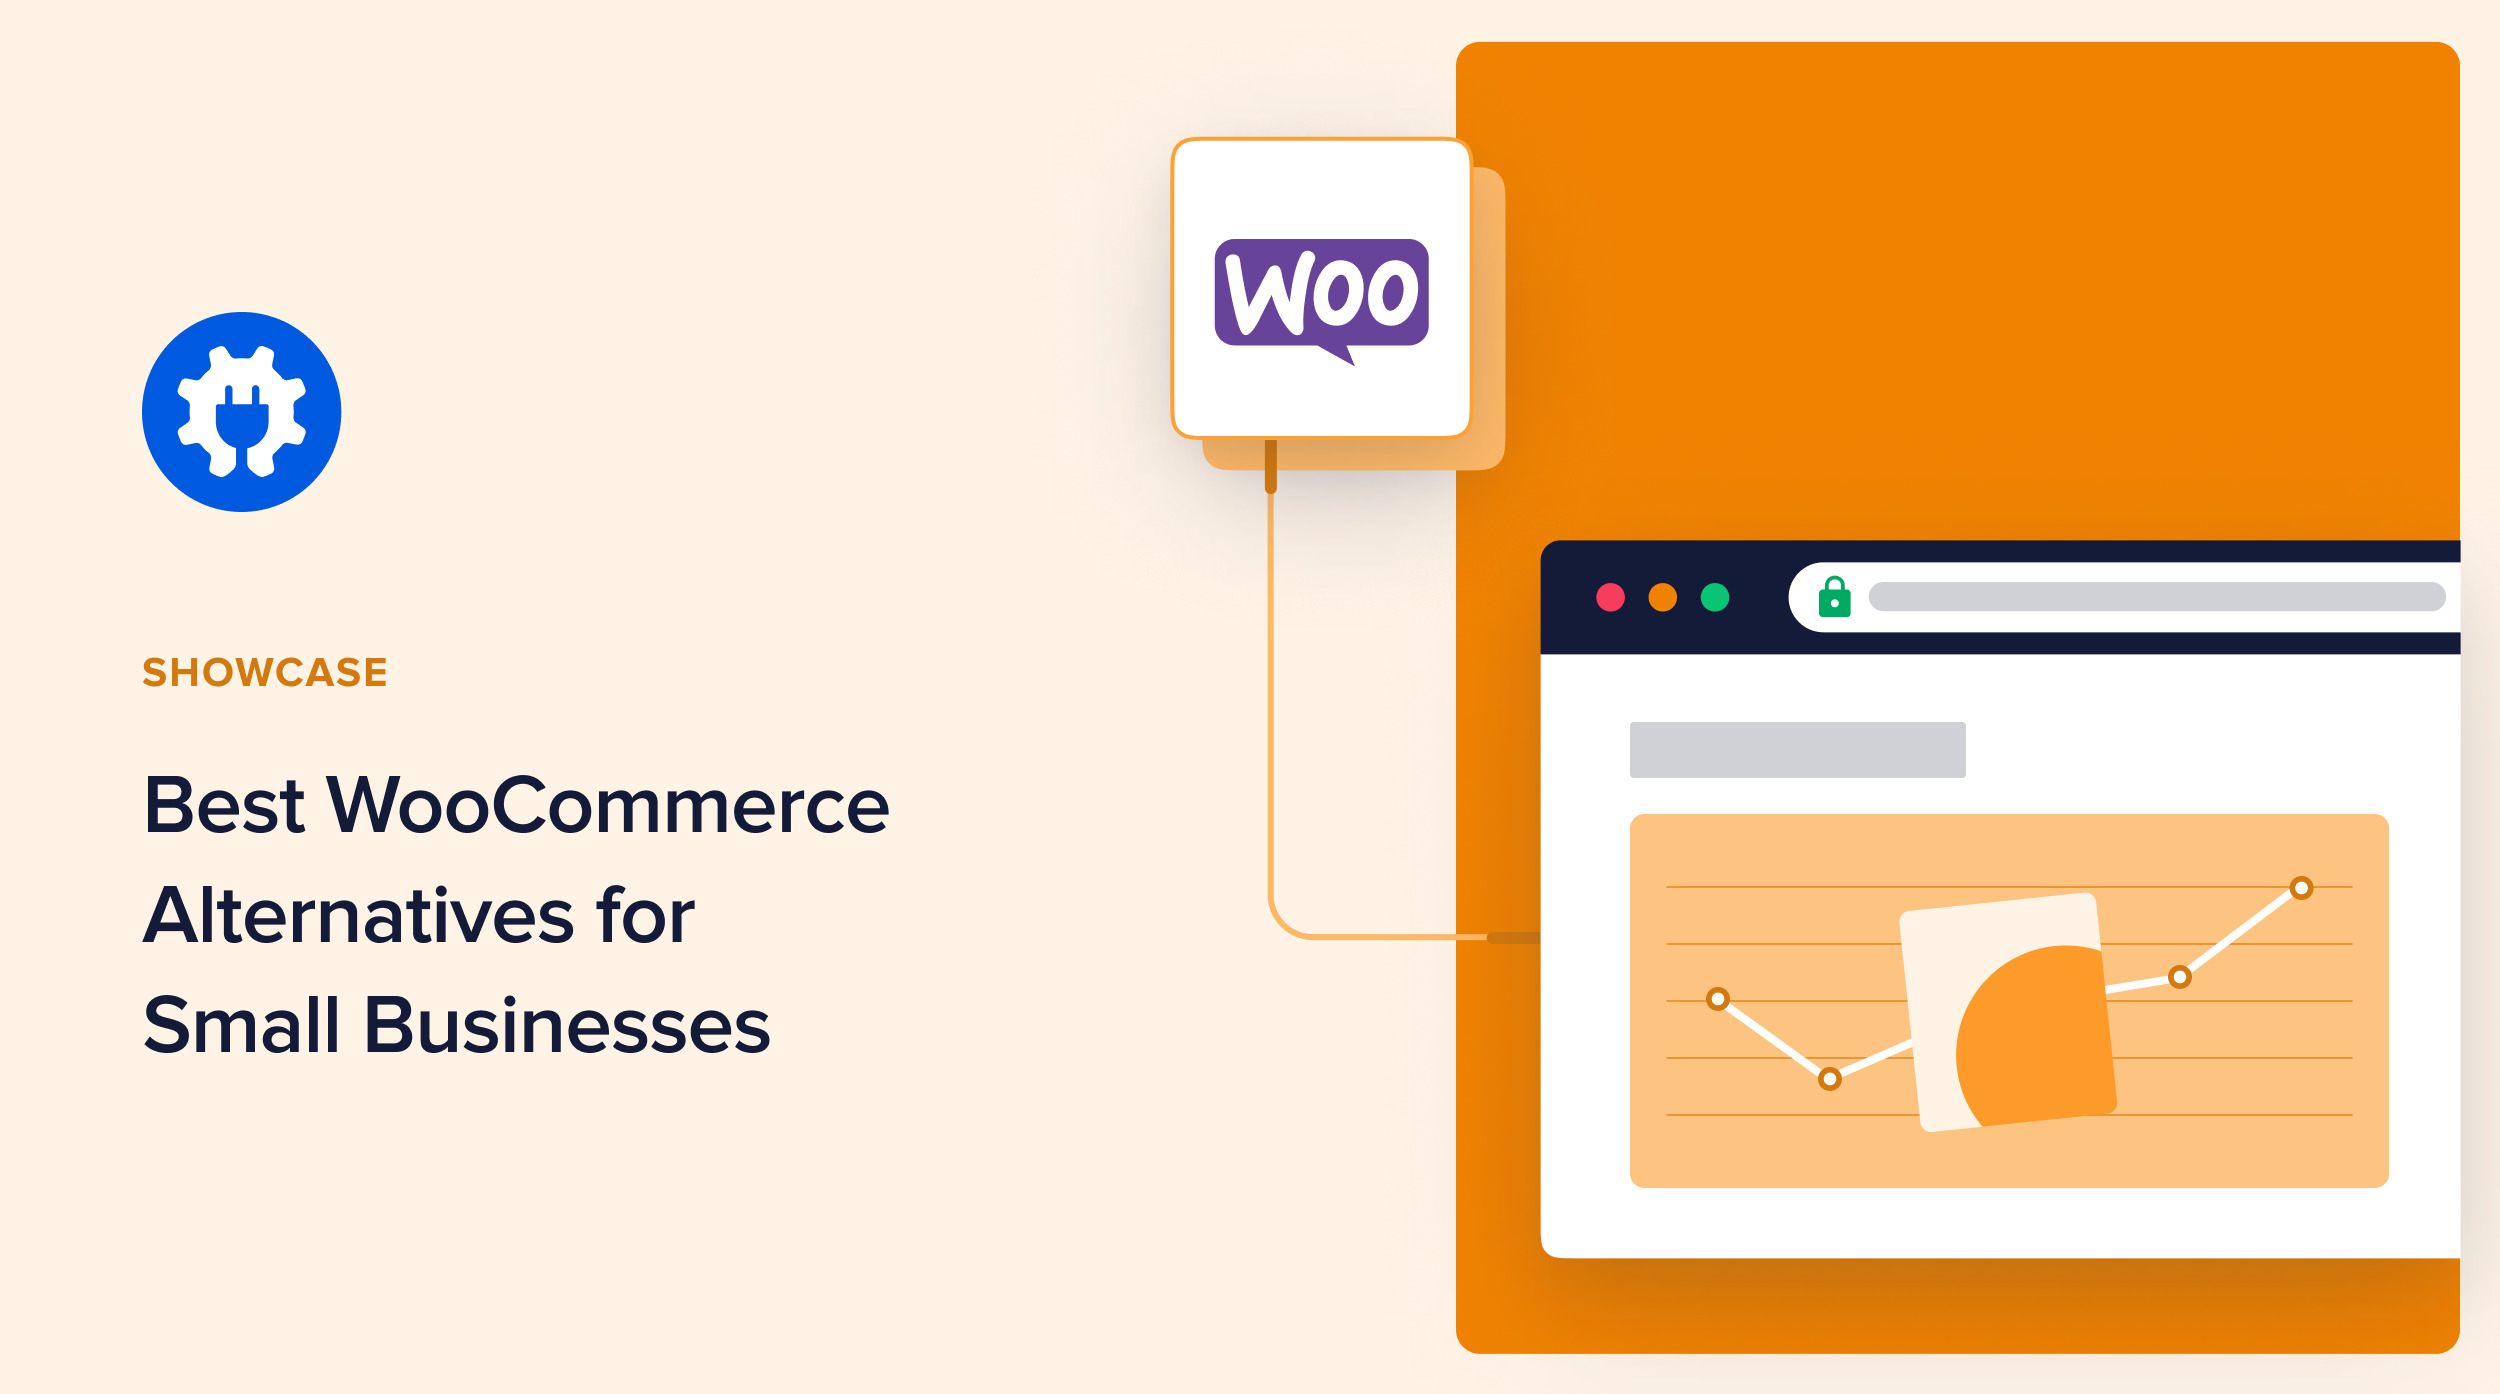 Donation for WooCommerce Store Owner's Guide – Basic Concepts Documentation  - WooCommerce